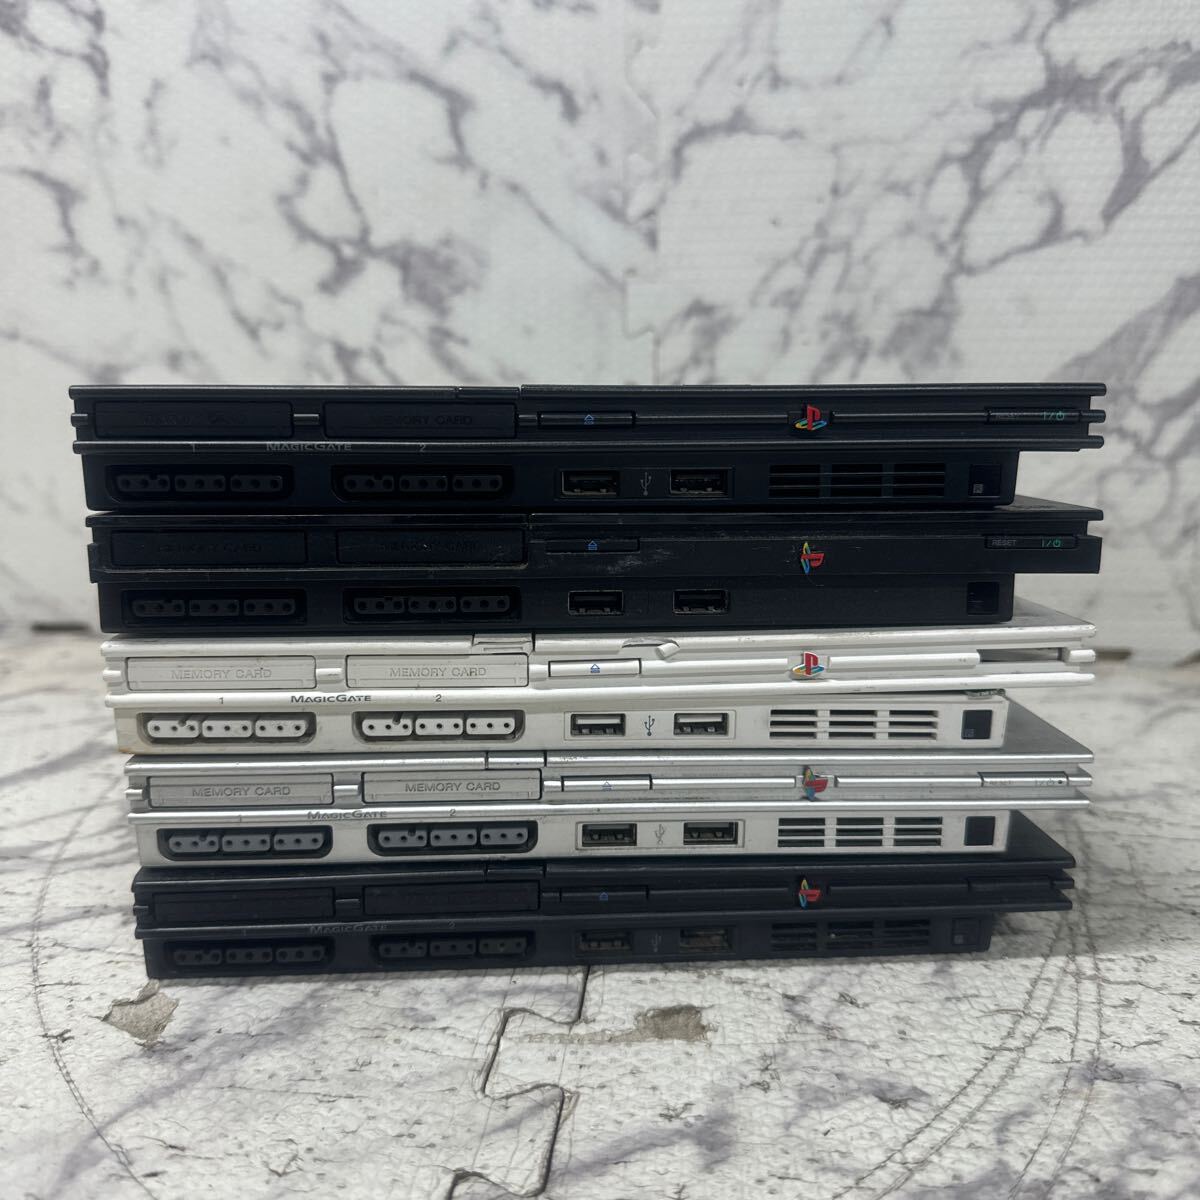 MYG-1654 激安 ゲー厶機 本体 SONY PlayStation2 PS2 SCPH-70000 SCPH-75000 SCPH-77000 SCPH-90000 5点 4台通電OK 1台通電NG ジャンク　_画像8